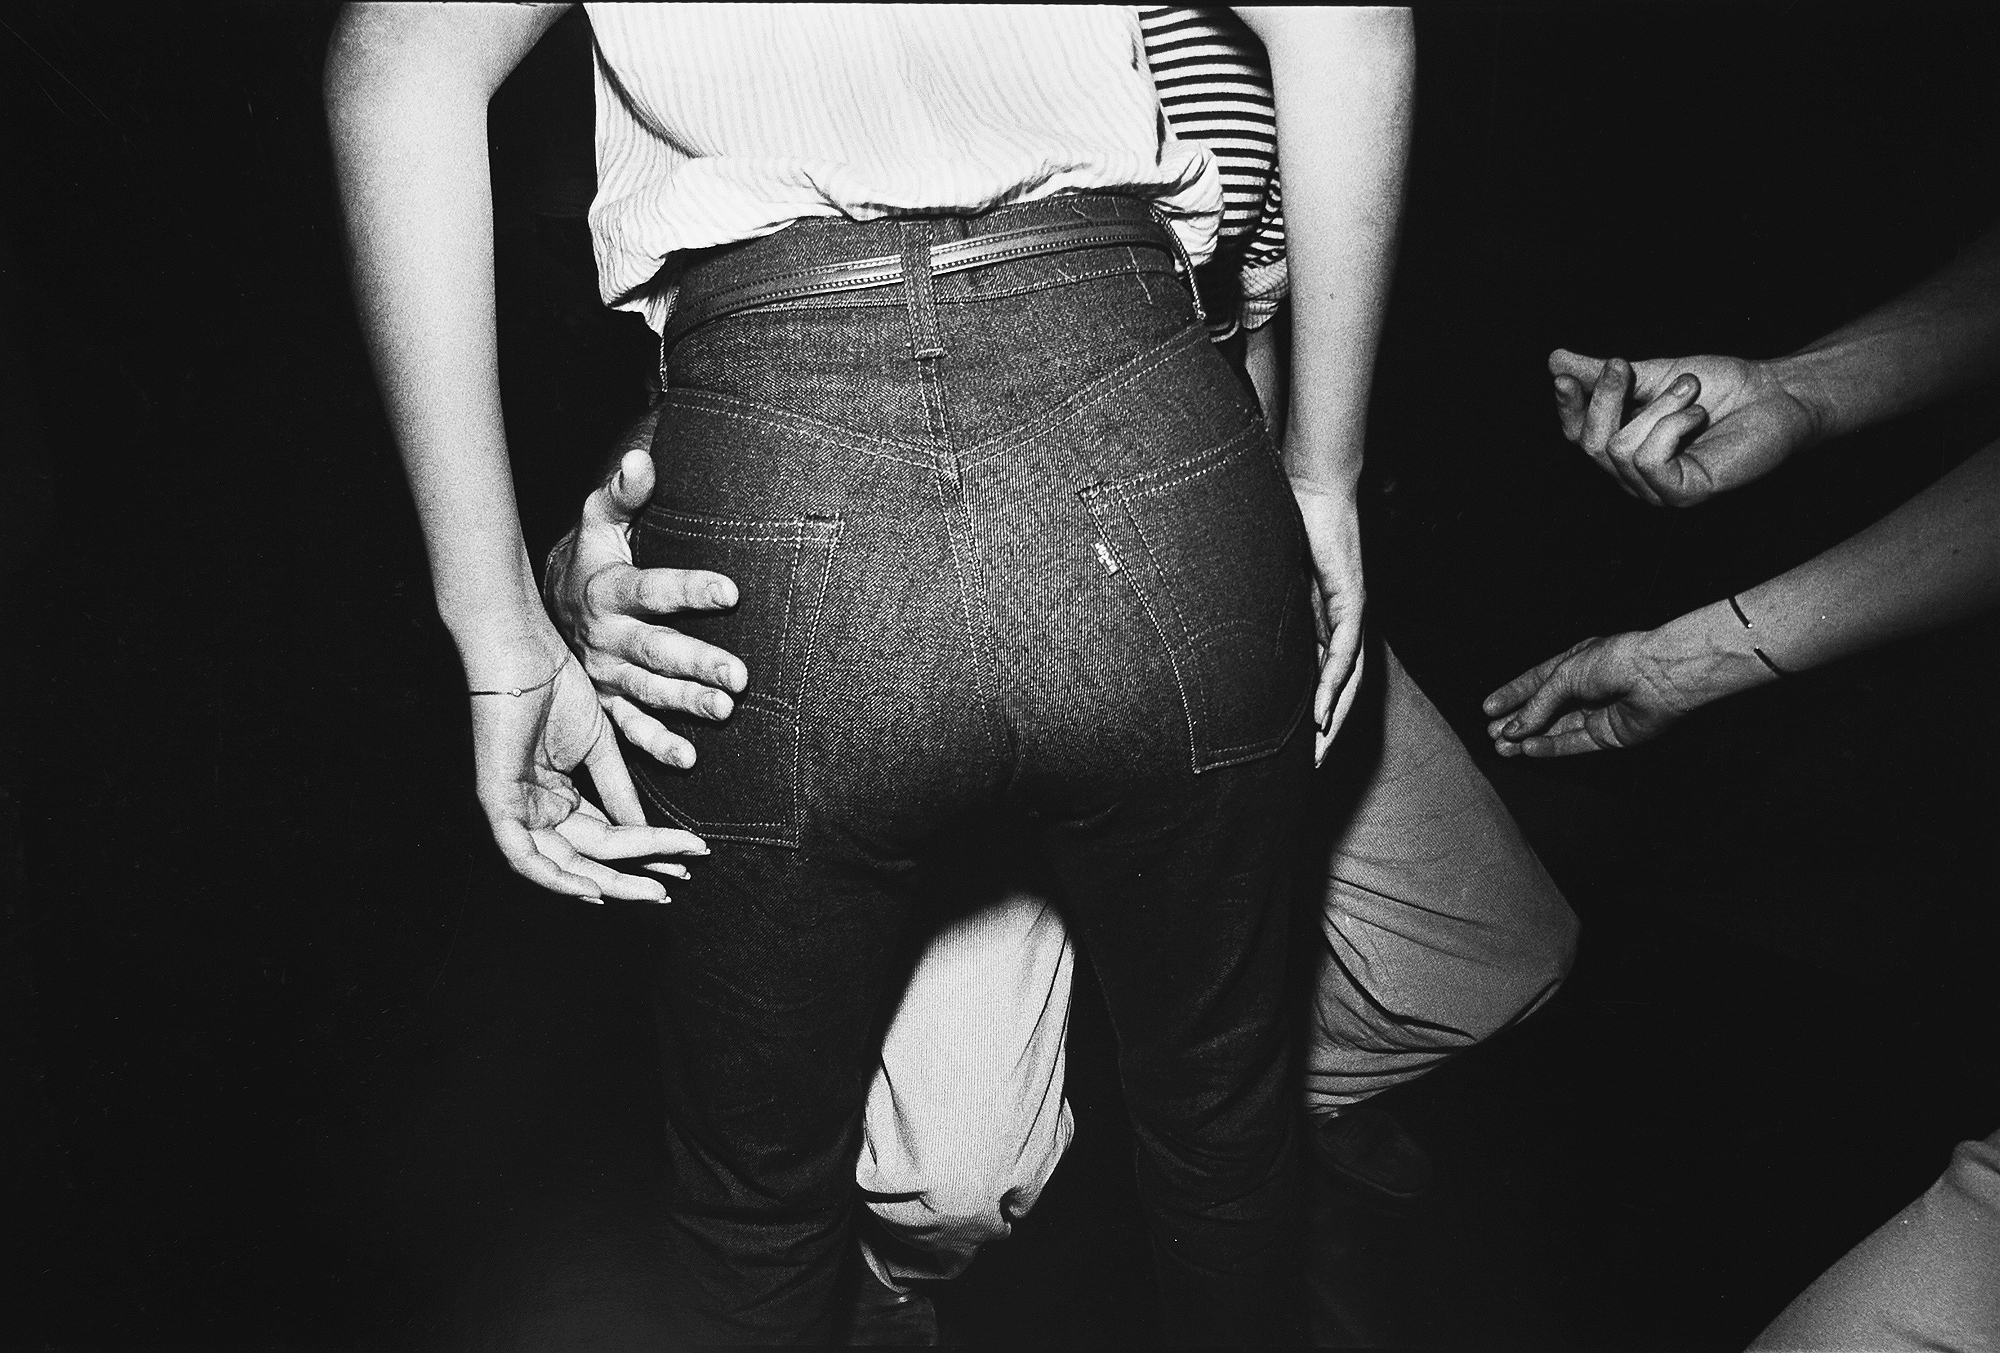 Tony_Ward_photography_early_work_Night_Fever_portfolio_1970's_erotic_dirty_dancing_couples_grinding_sexy_jeans